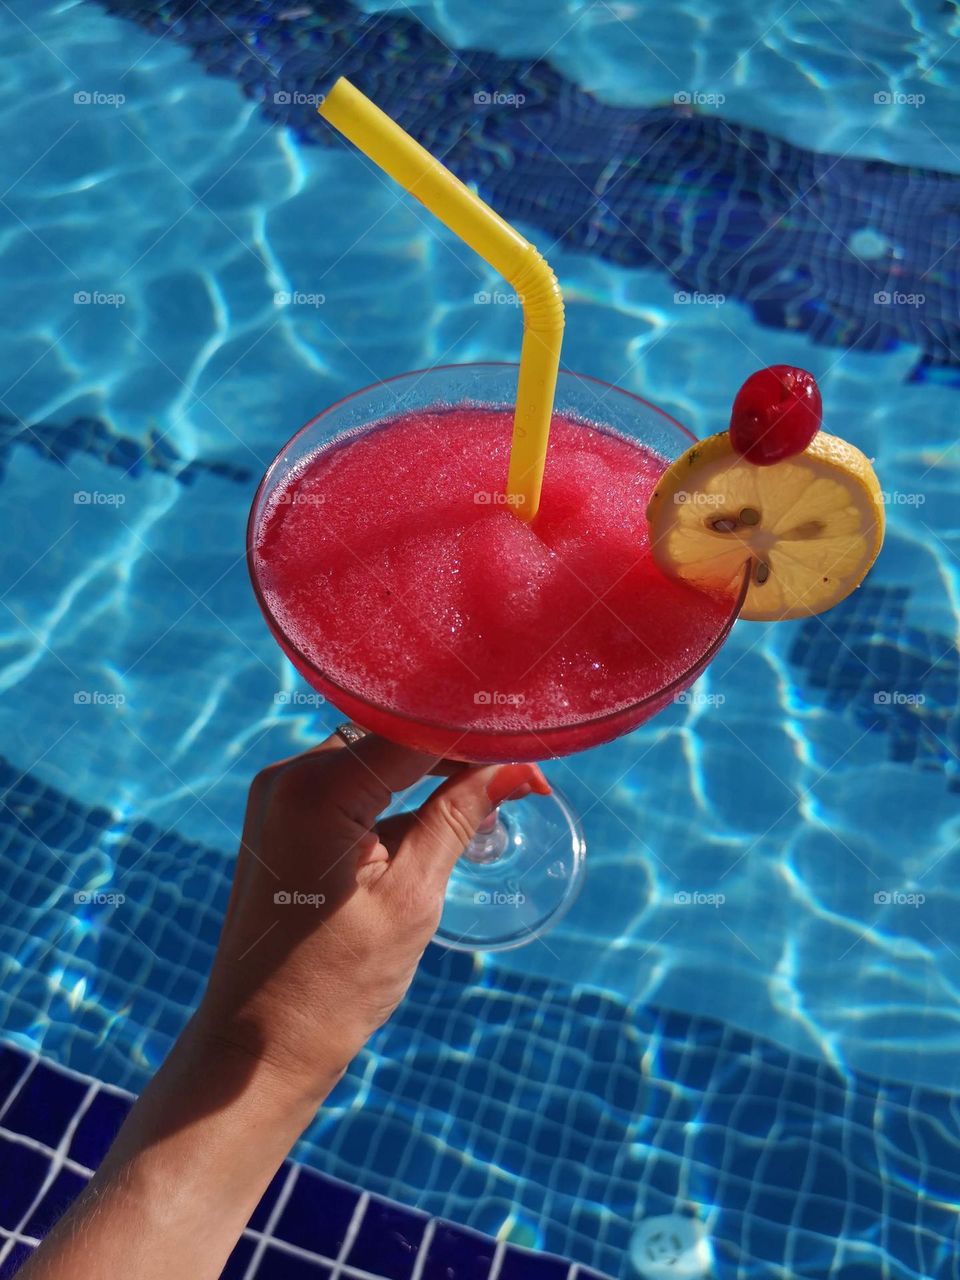 Tasty cocktail and swimming pool. Summer mood. Relax and enjoy your time.